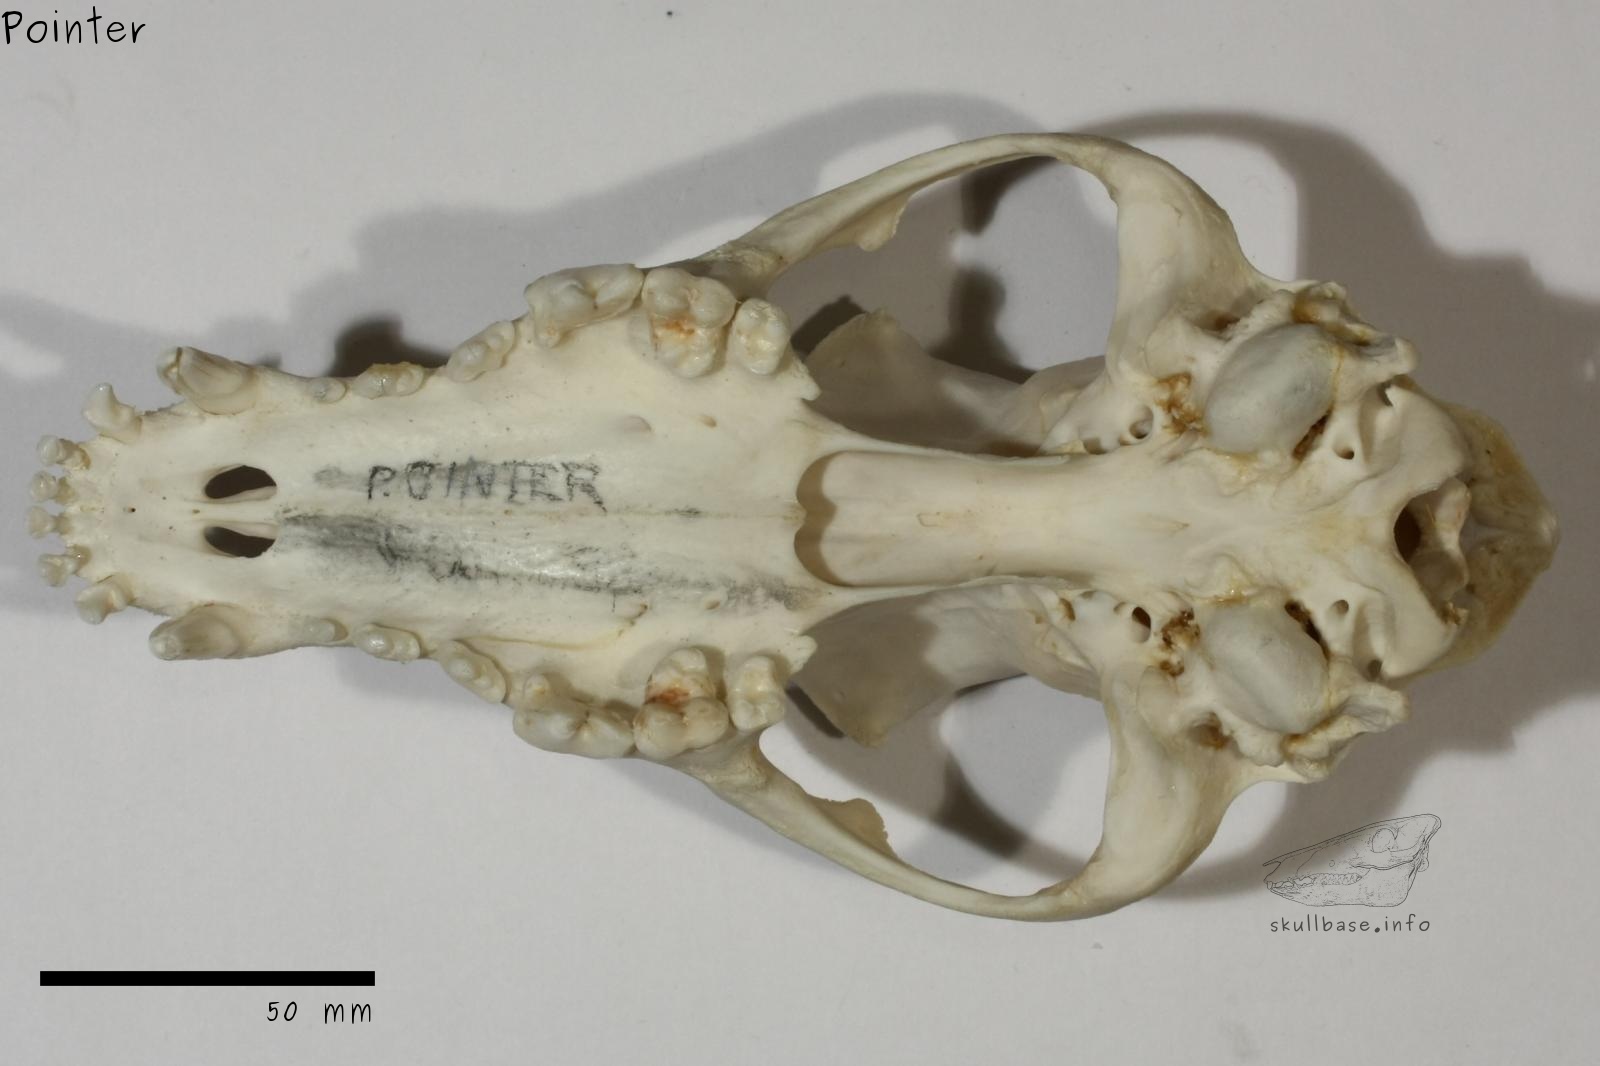 Pointer (Canis lupus familiaris) skull ventral view